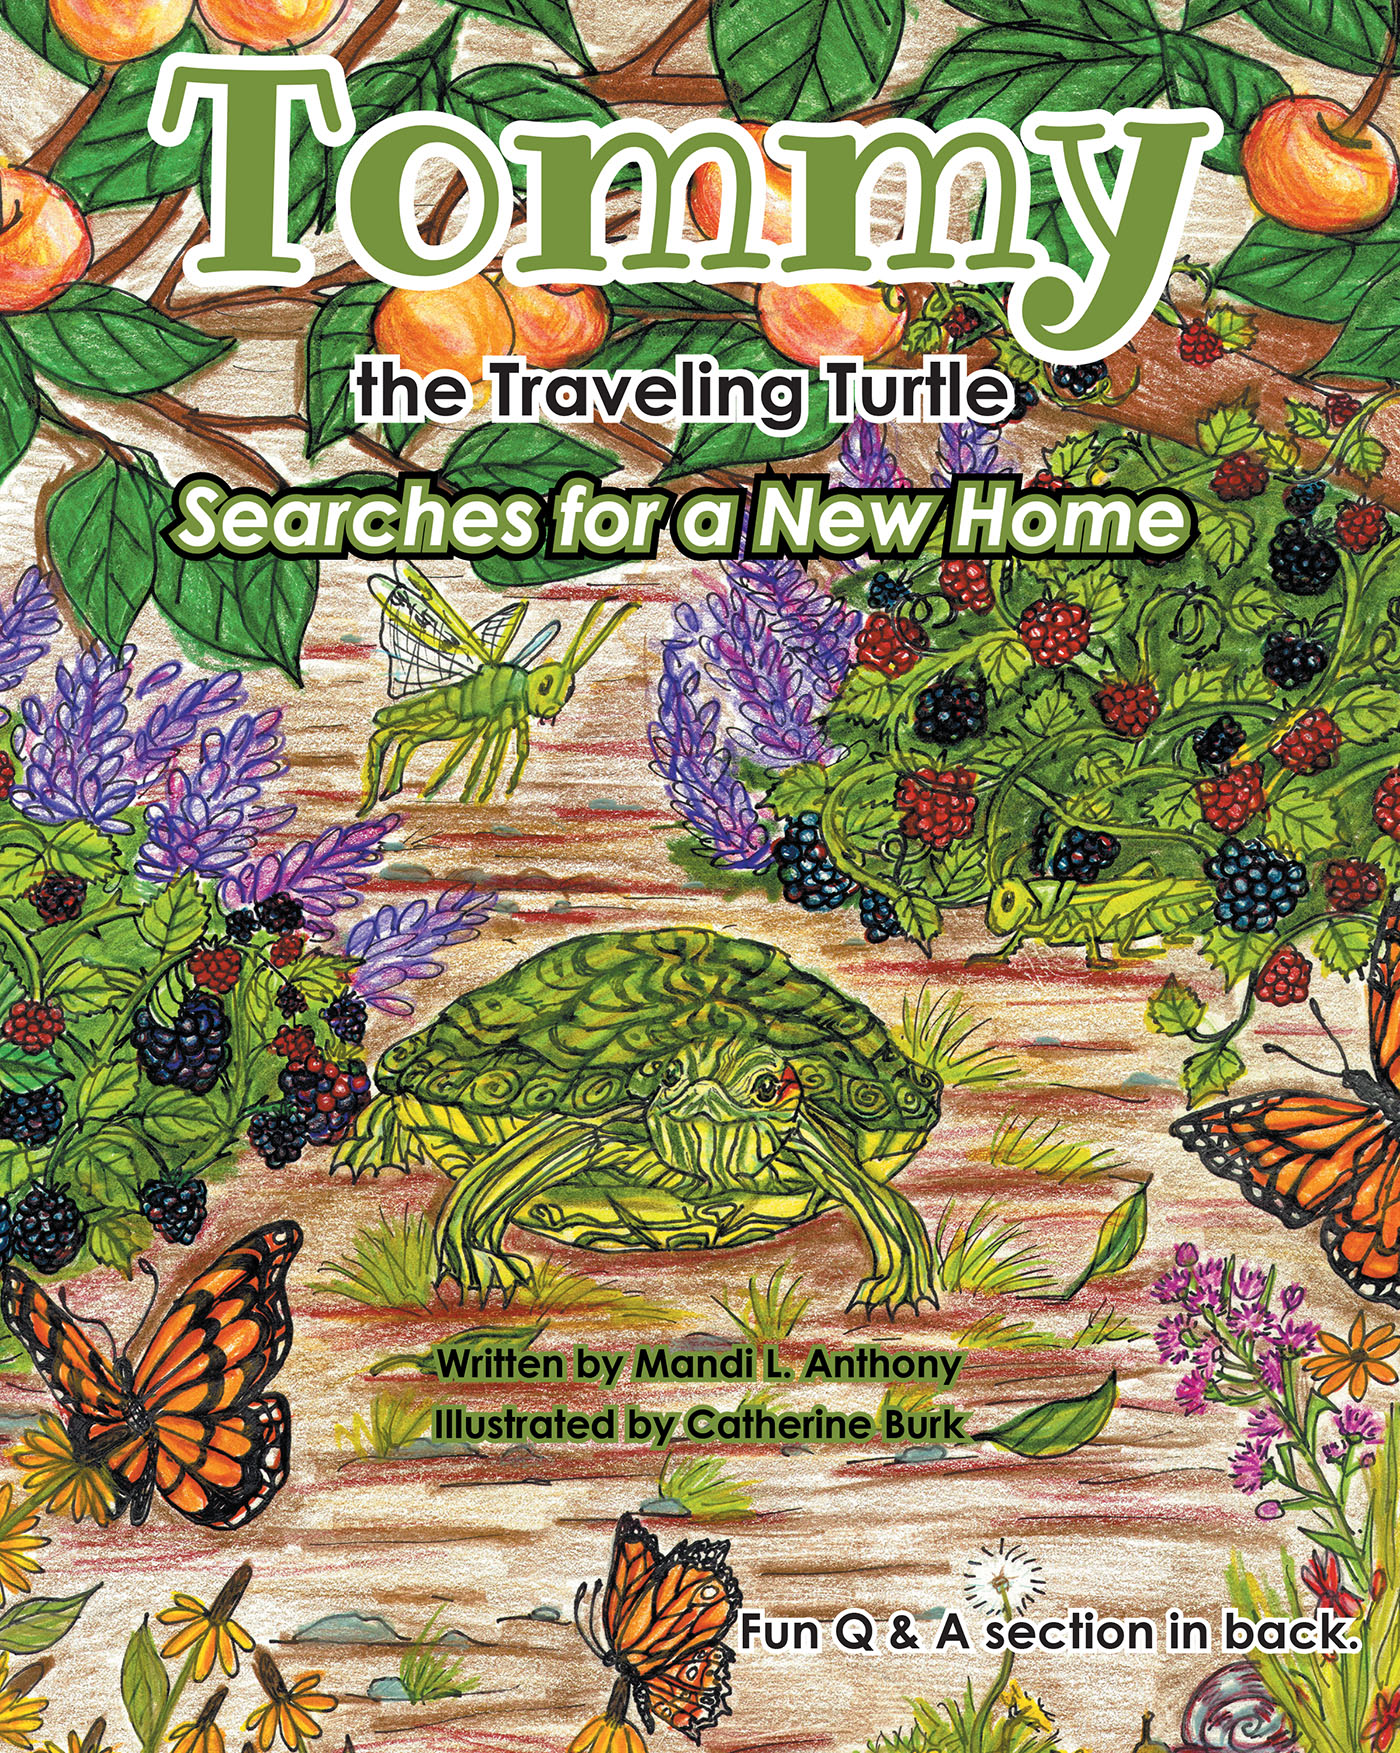 Author Mandi L. Anthony’s New Book, “Tommy the Traveling Turtle Searches for a New Home,” Tells the Story of an Adventurous Turtle Who Must Find a New Place to Live